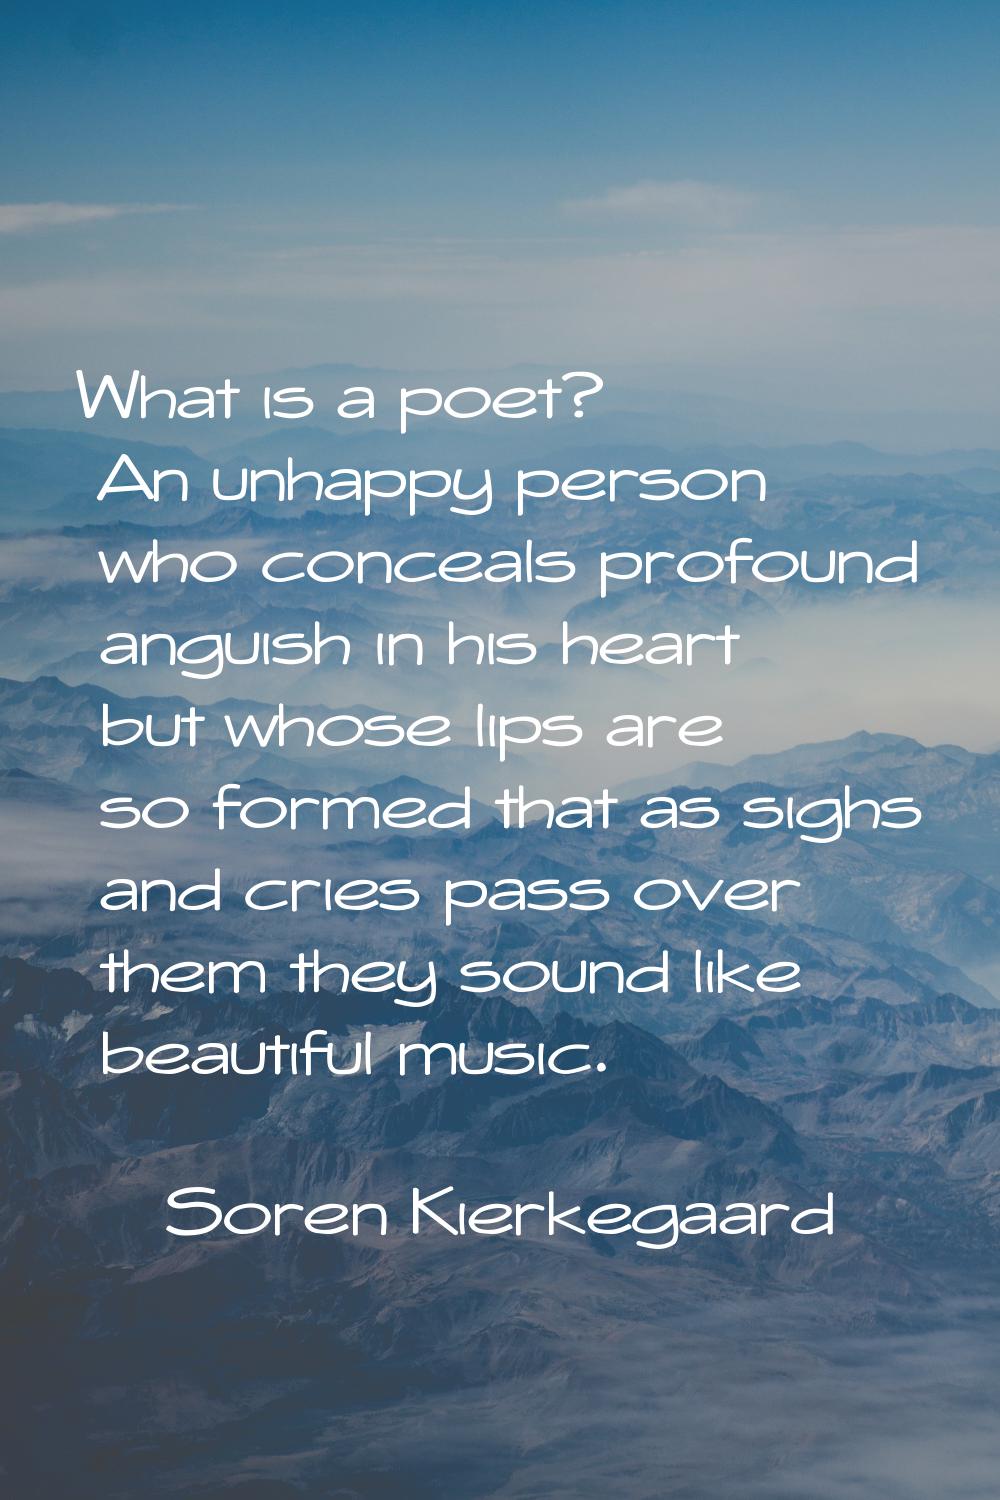 What is a poet? An unhappy person who conceals profound anguish in his heart but whose lips are so 